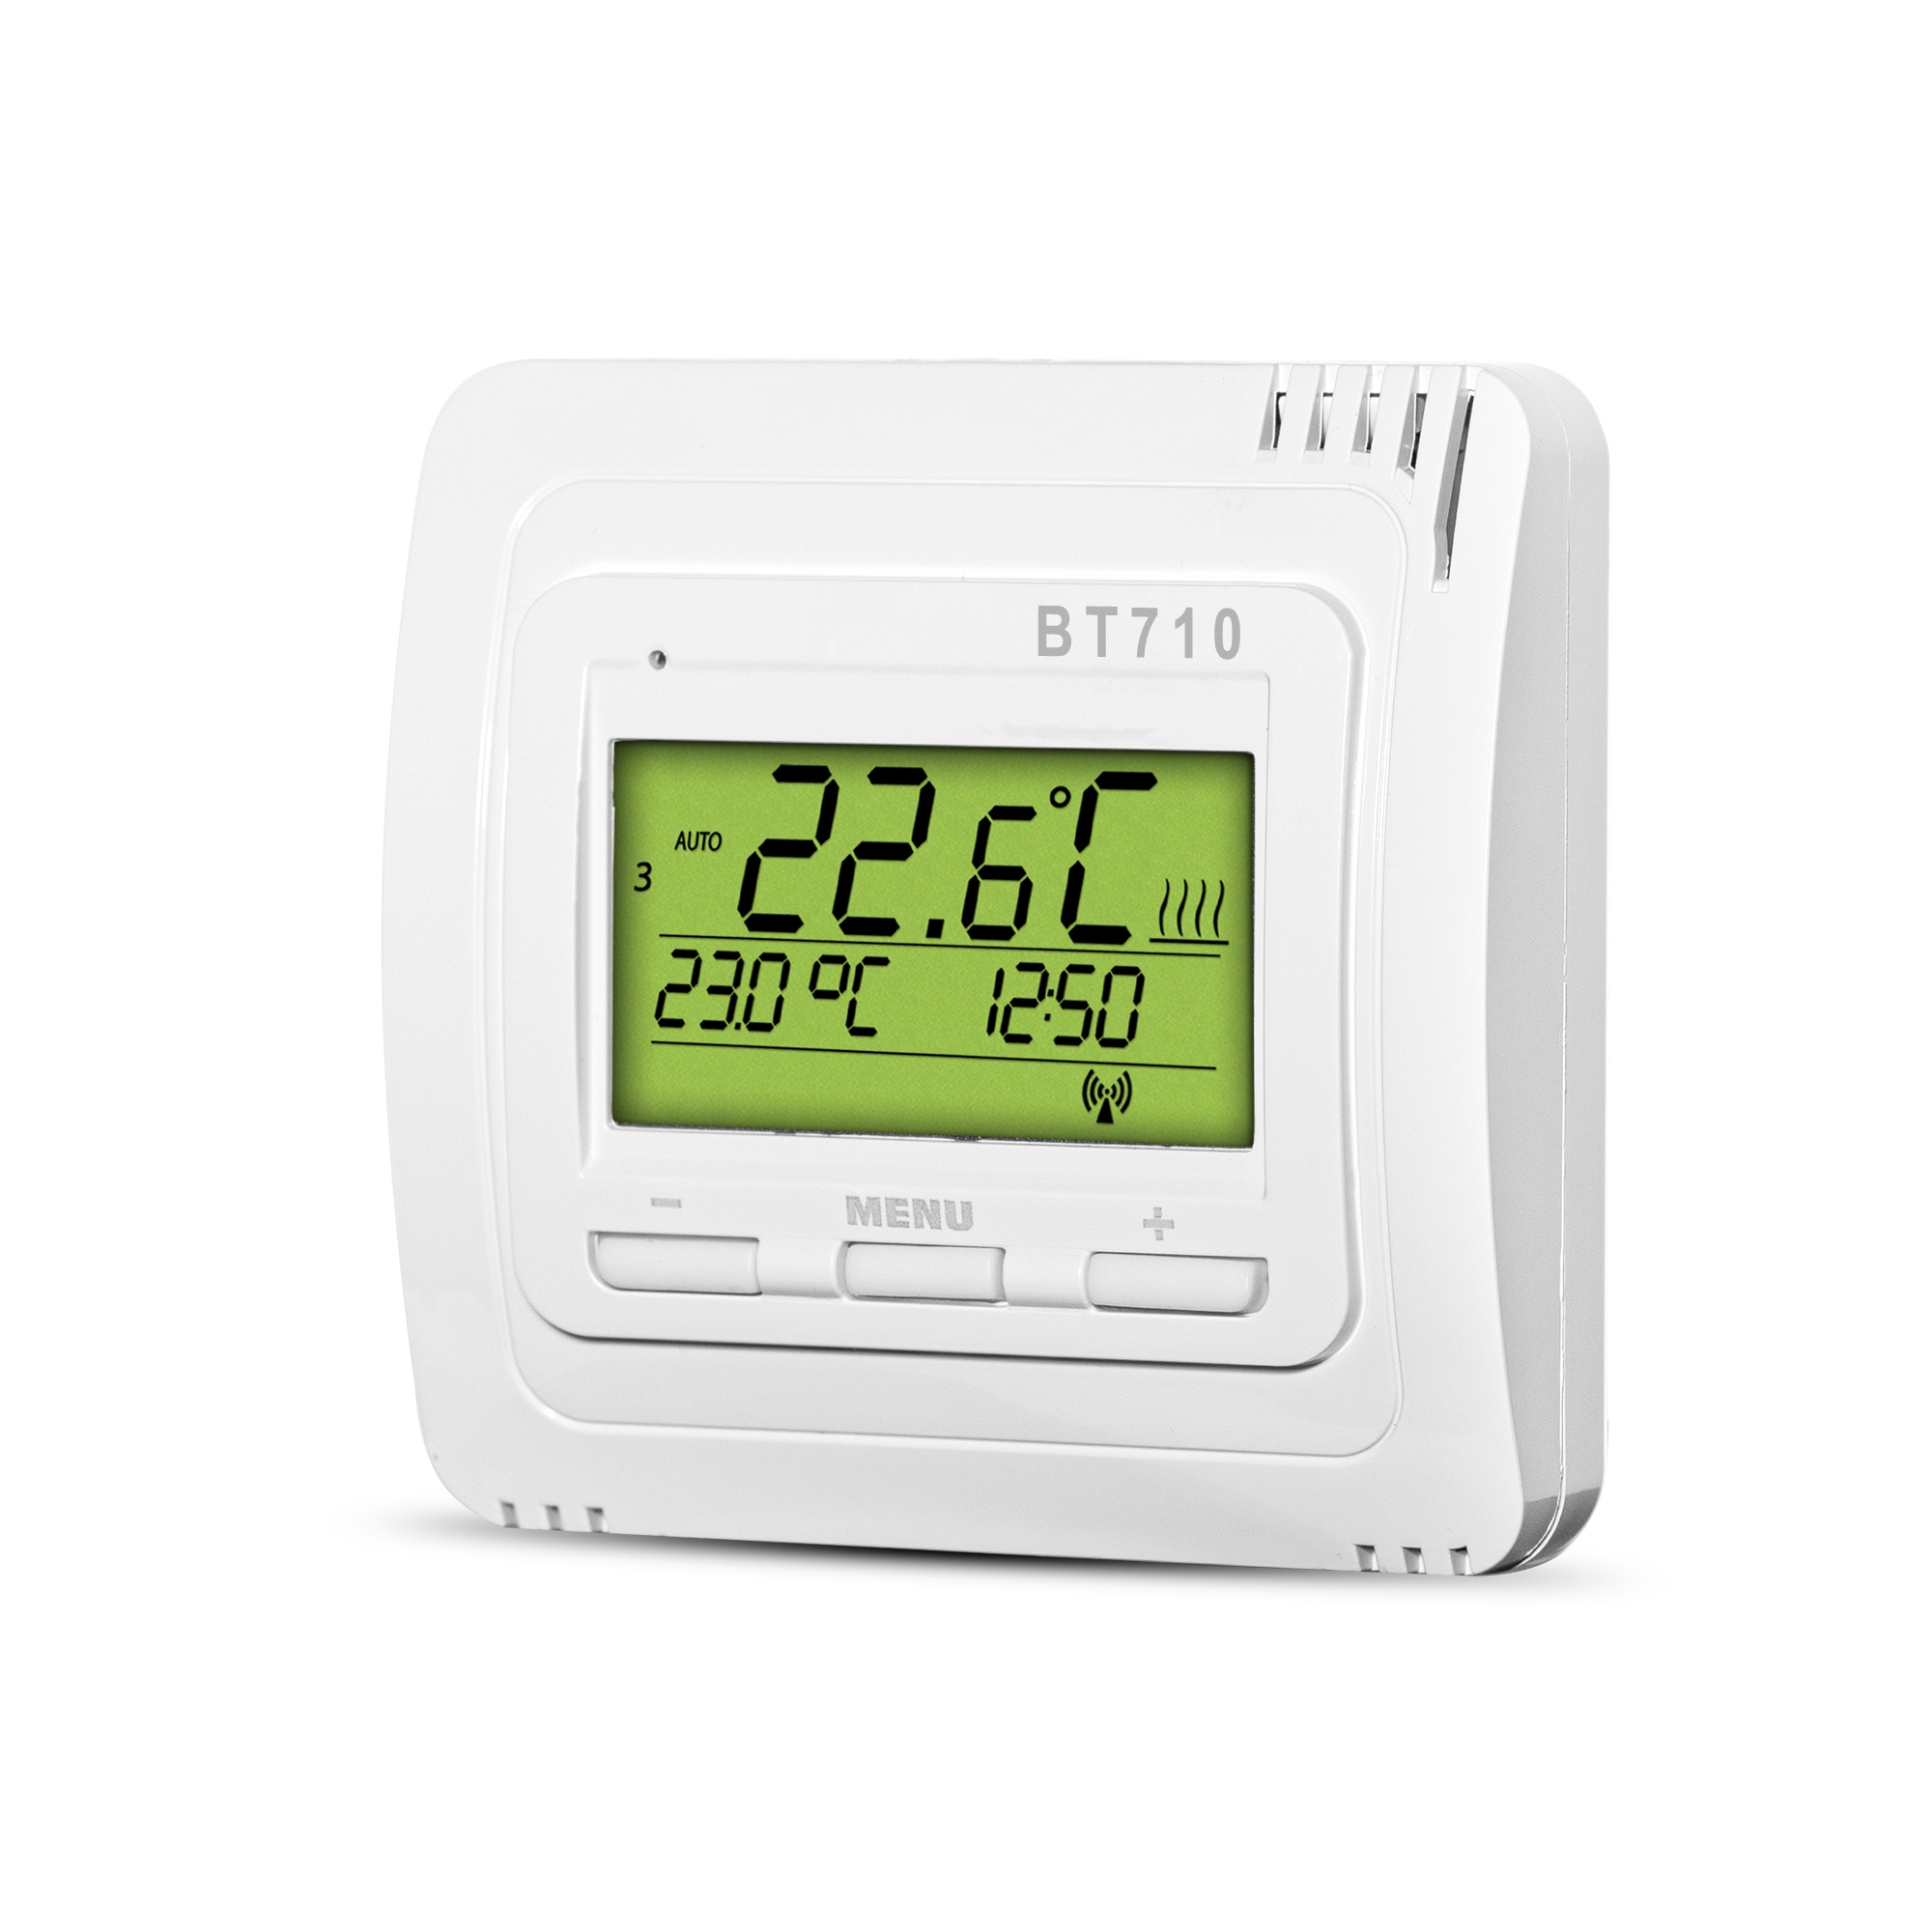 Funk-Raumthermostat 'BT710' + product picture